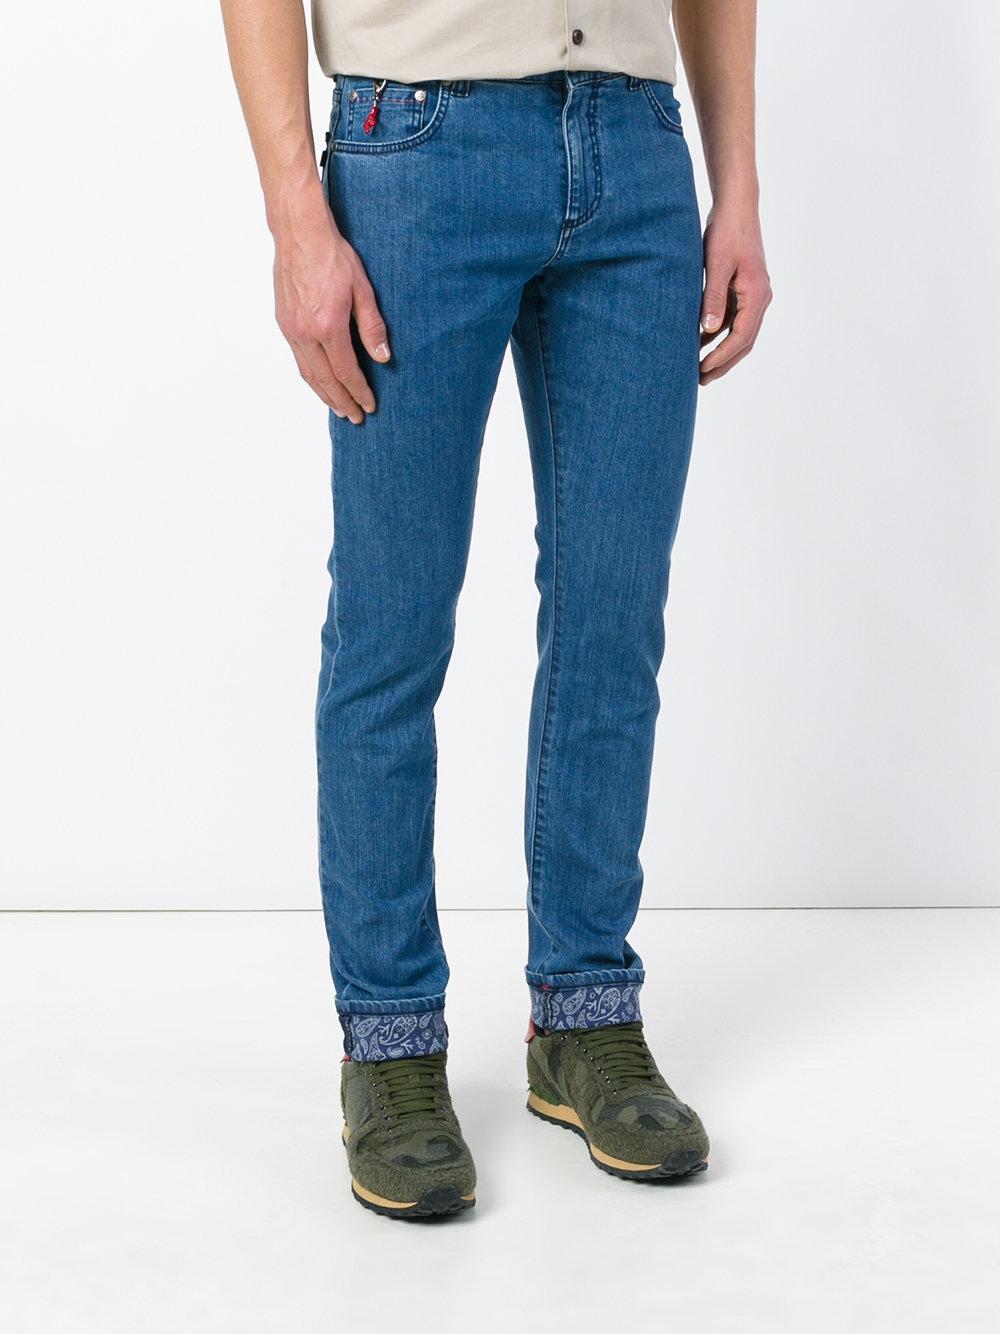 Lyst - Isaia Paisley Lined Skinny Jeans in Blue for Men